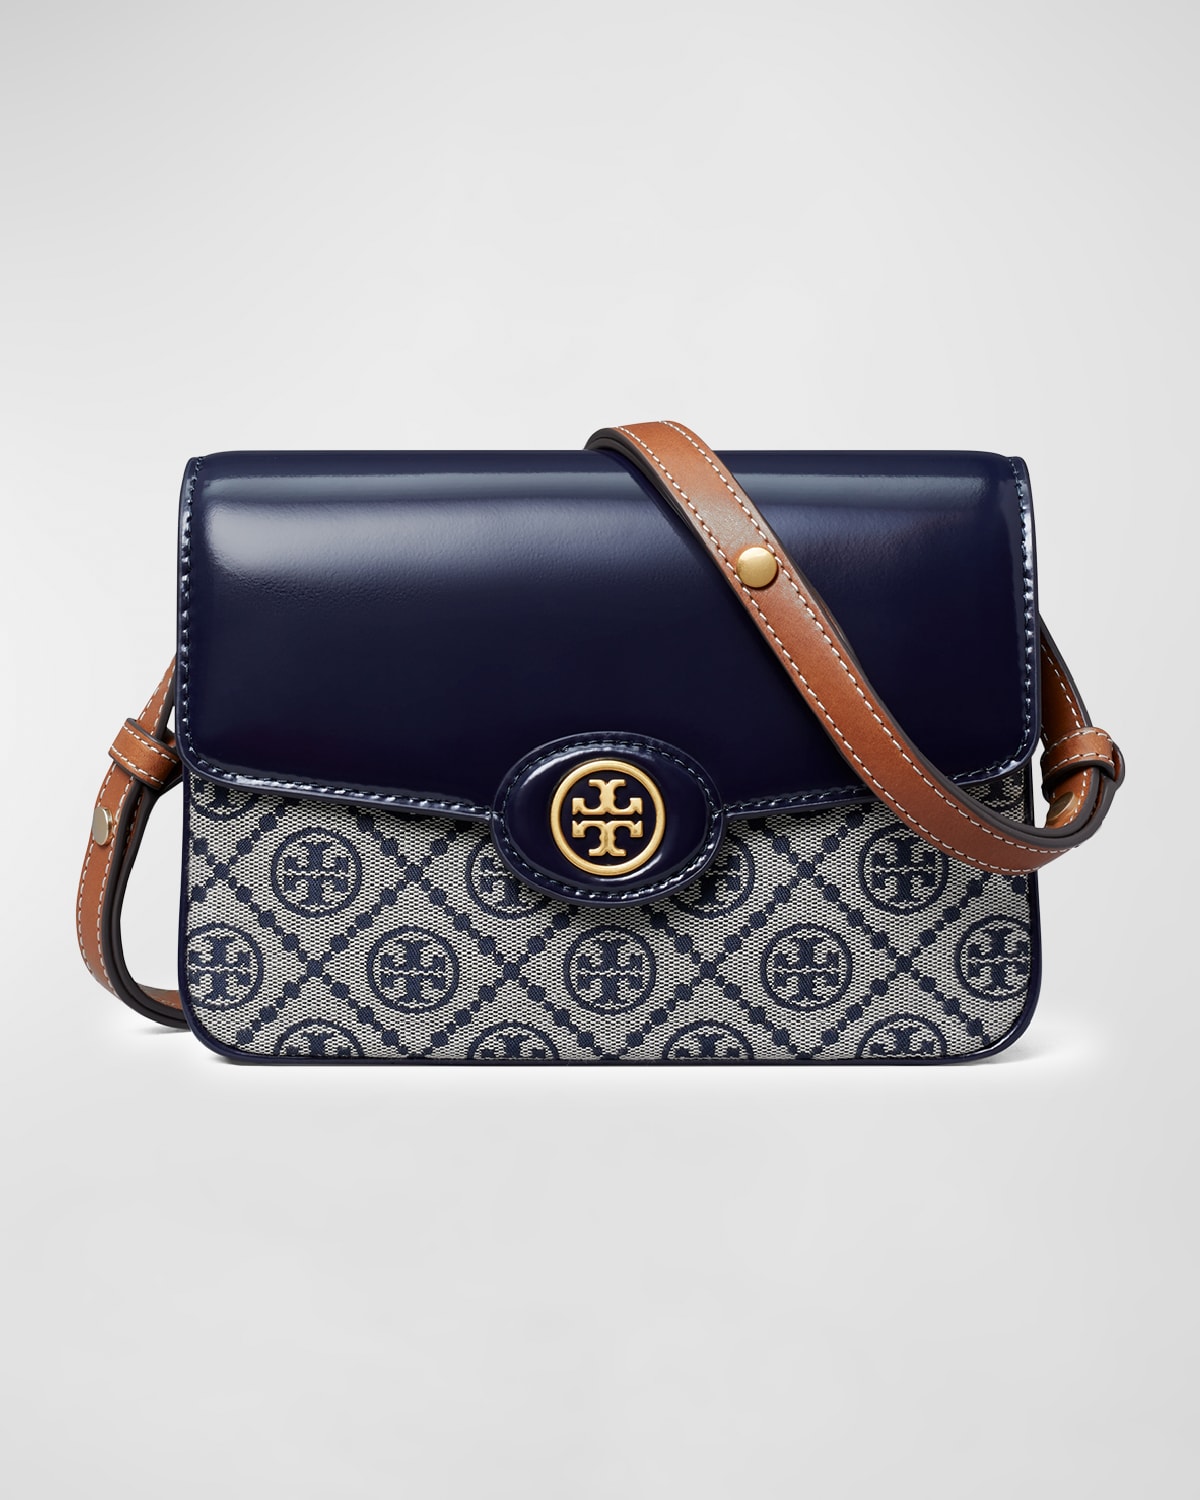 Tory Burch Robinson Convertible Leather Shoulder Bag In Brown